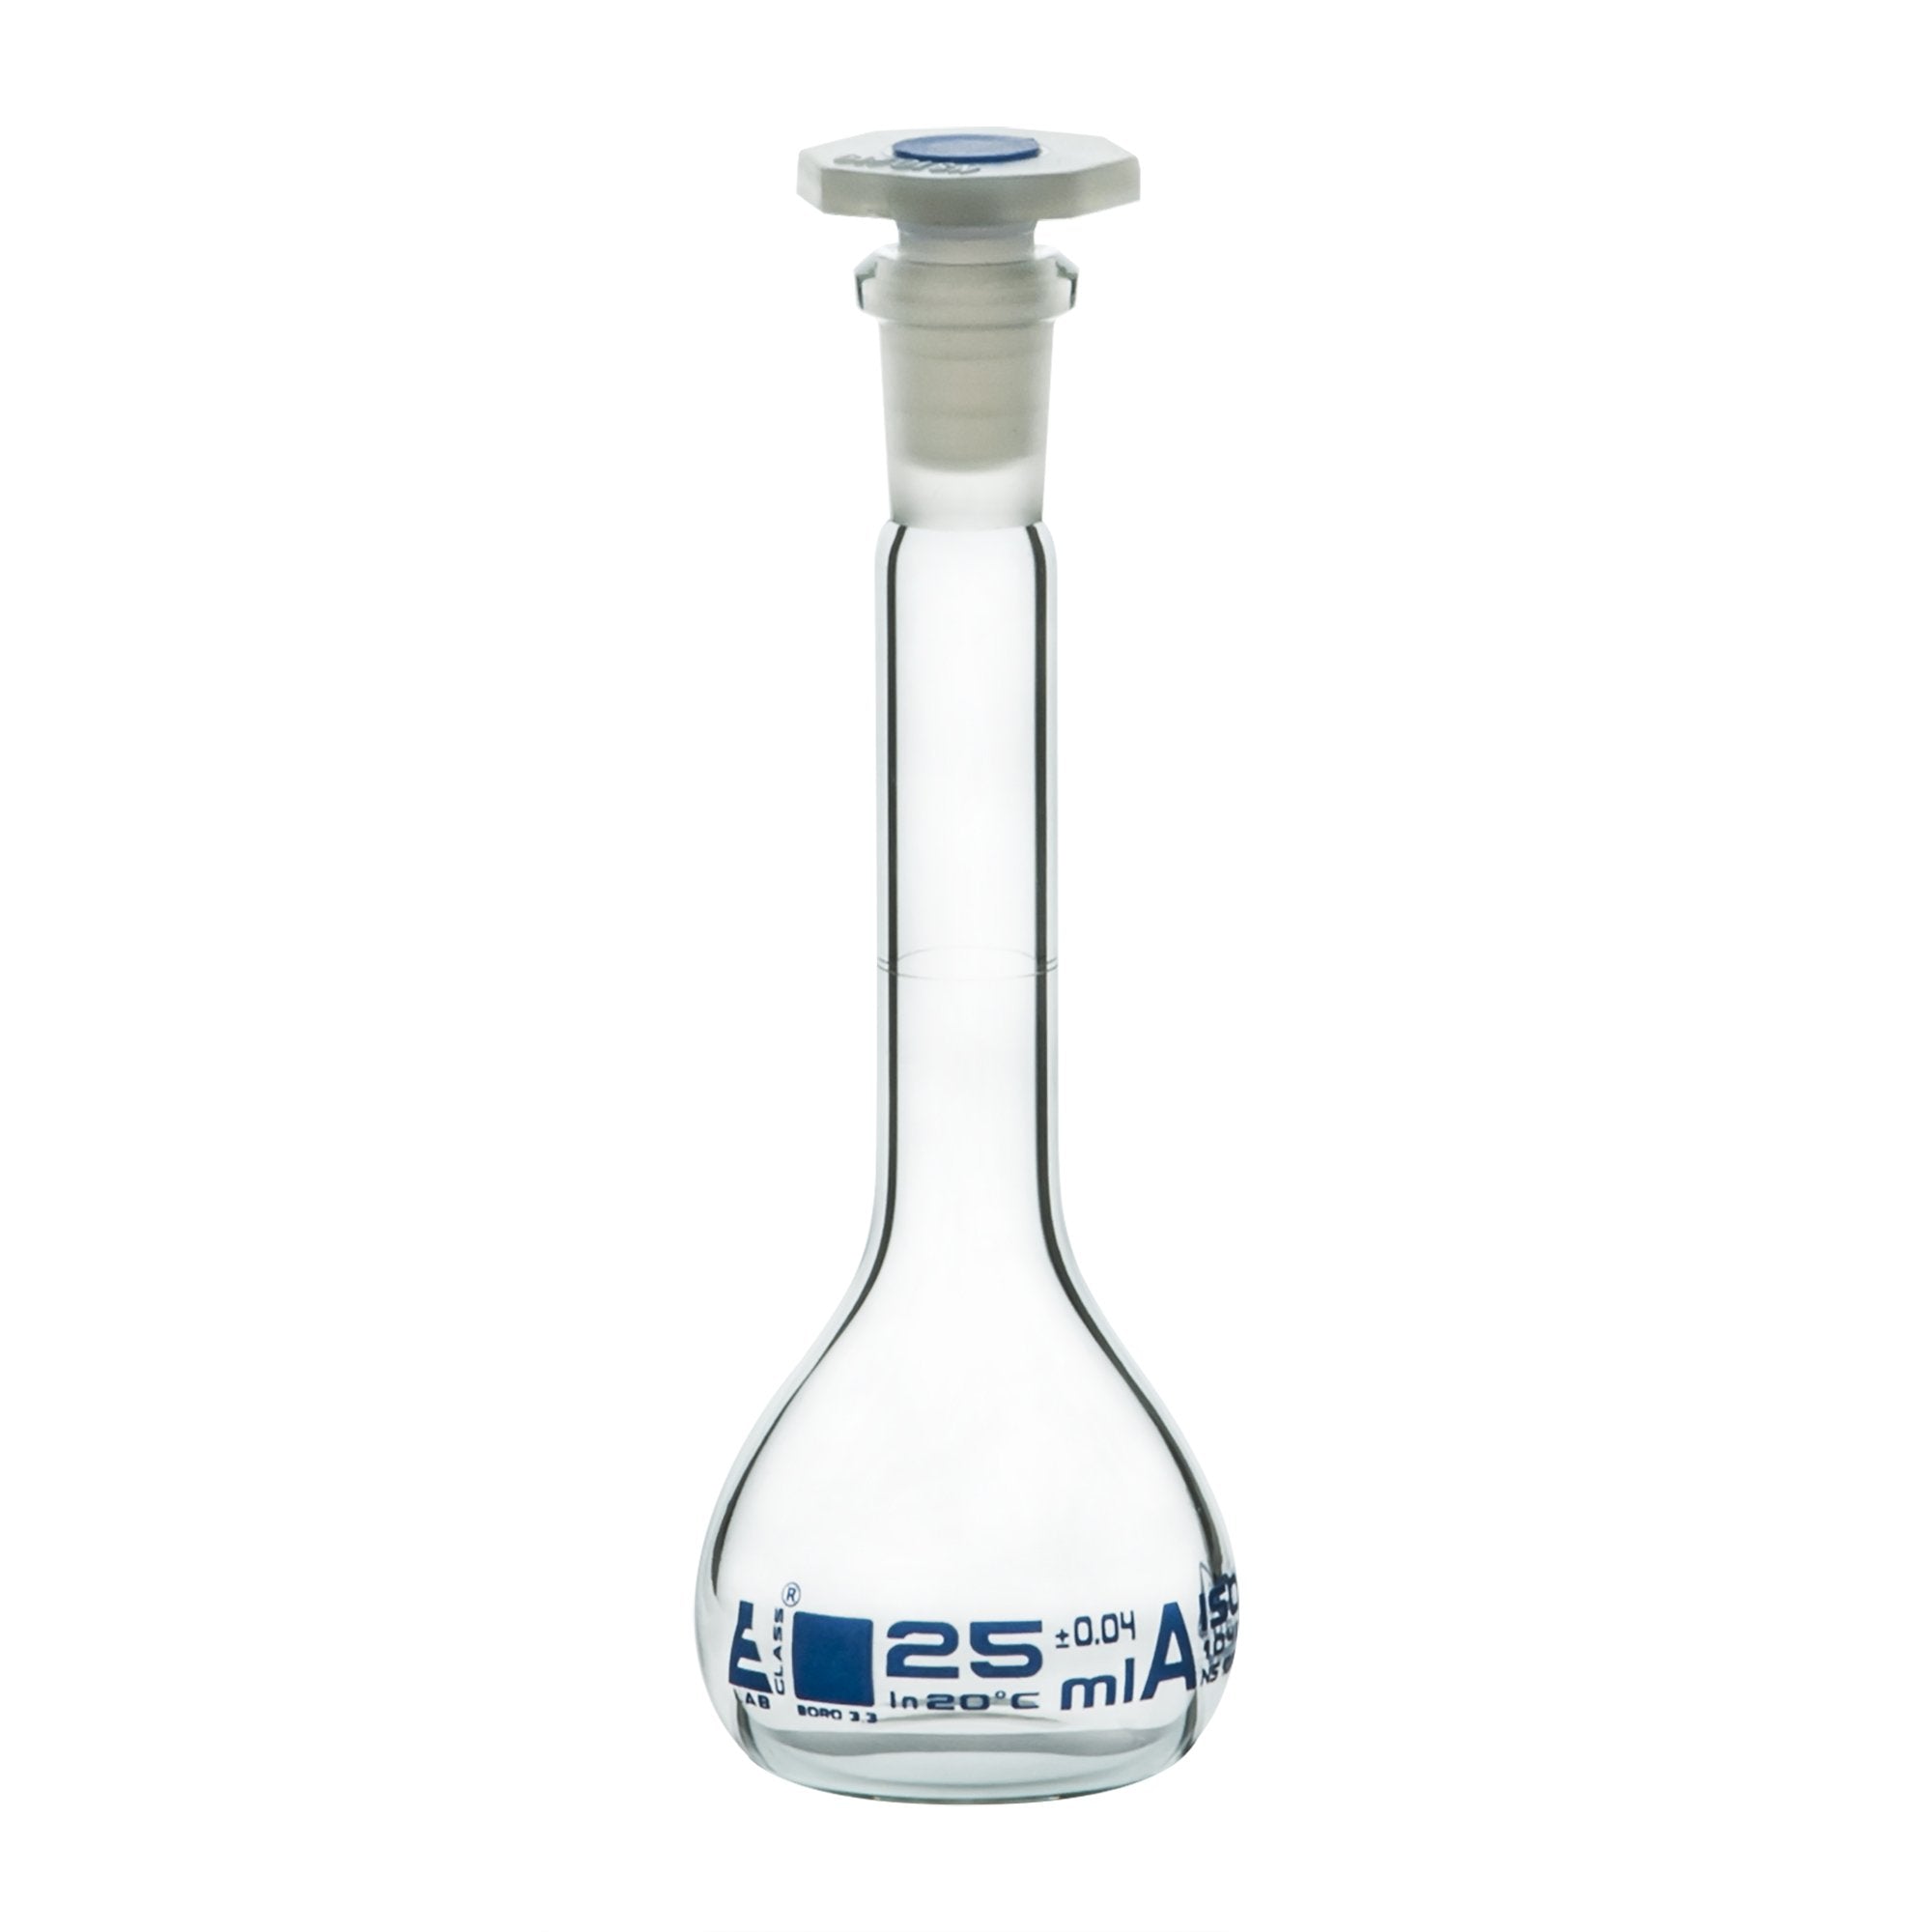 Borosilicate Glass Volumetric Flask with Polypropylene Stopper, 25 ml, Class A with Individual Work Certificate, Pack of 2,  Autoclavable